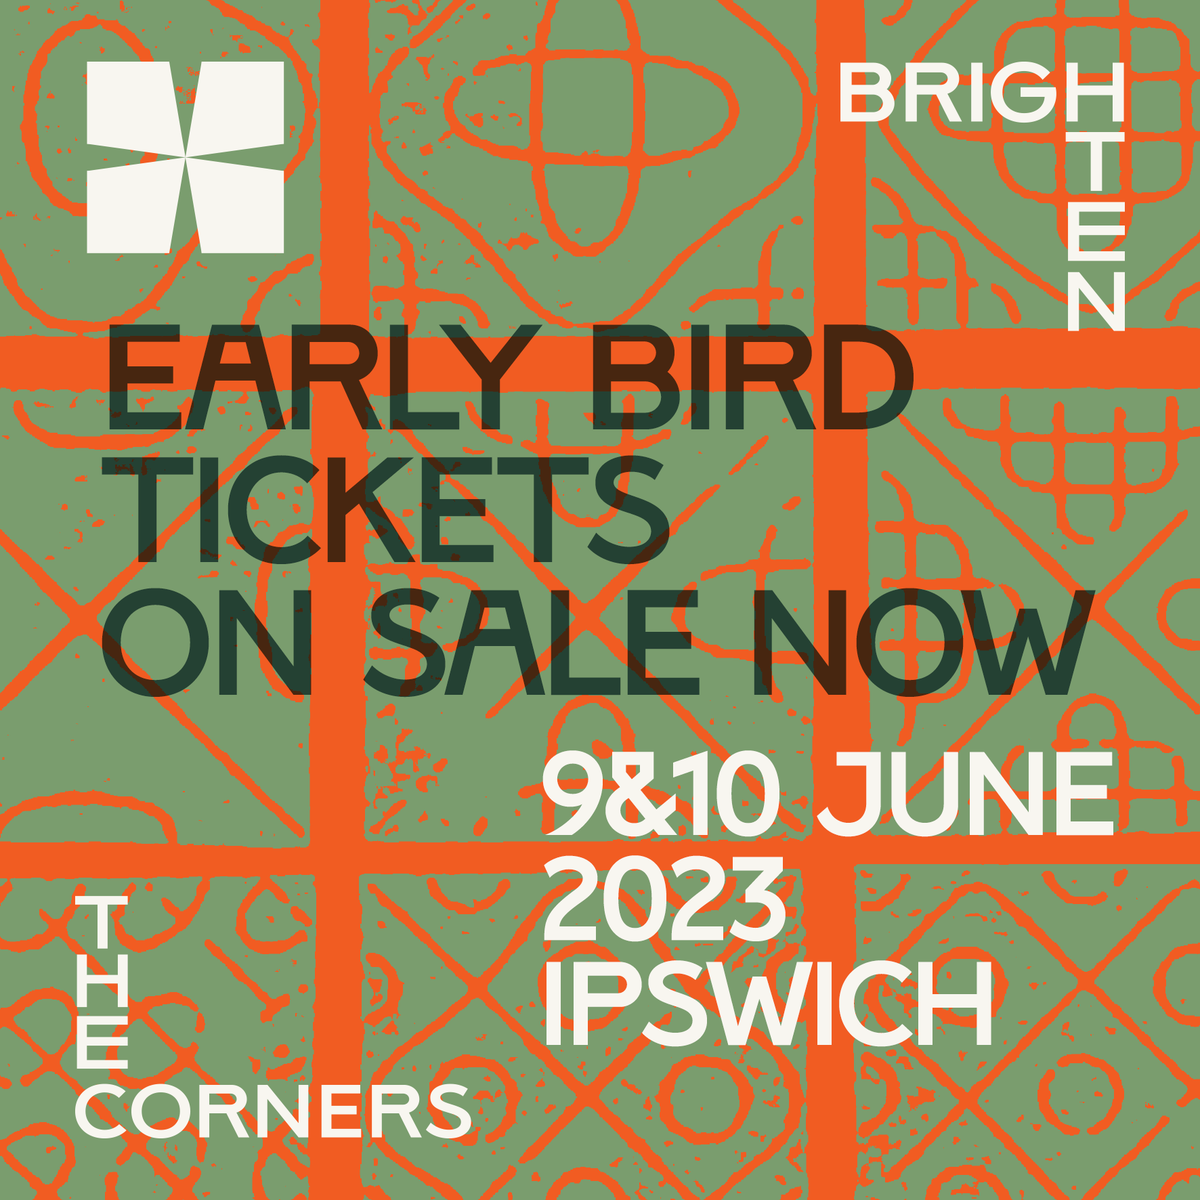 ✨ Early Bird tickets on sale now! 💃 🎟 bit.ly/BTCfest2023 Weekend tickets available now for Brighten The Corners Festival 2023 on Friday 9th & Saturday 10th June.